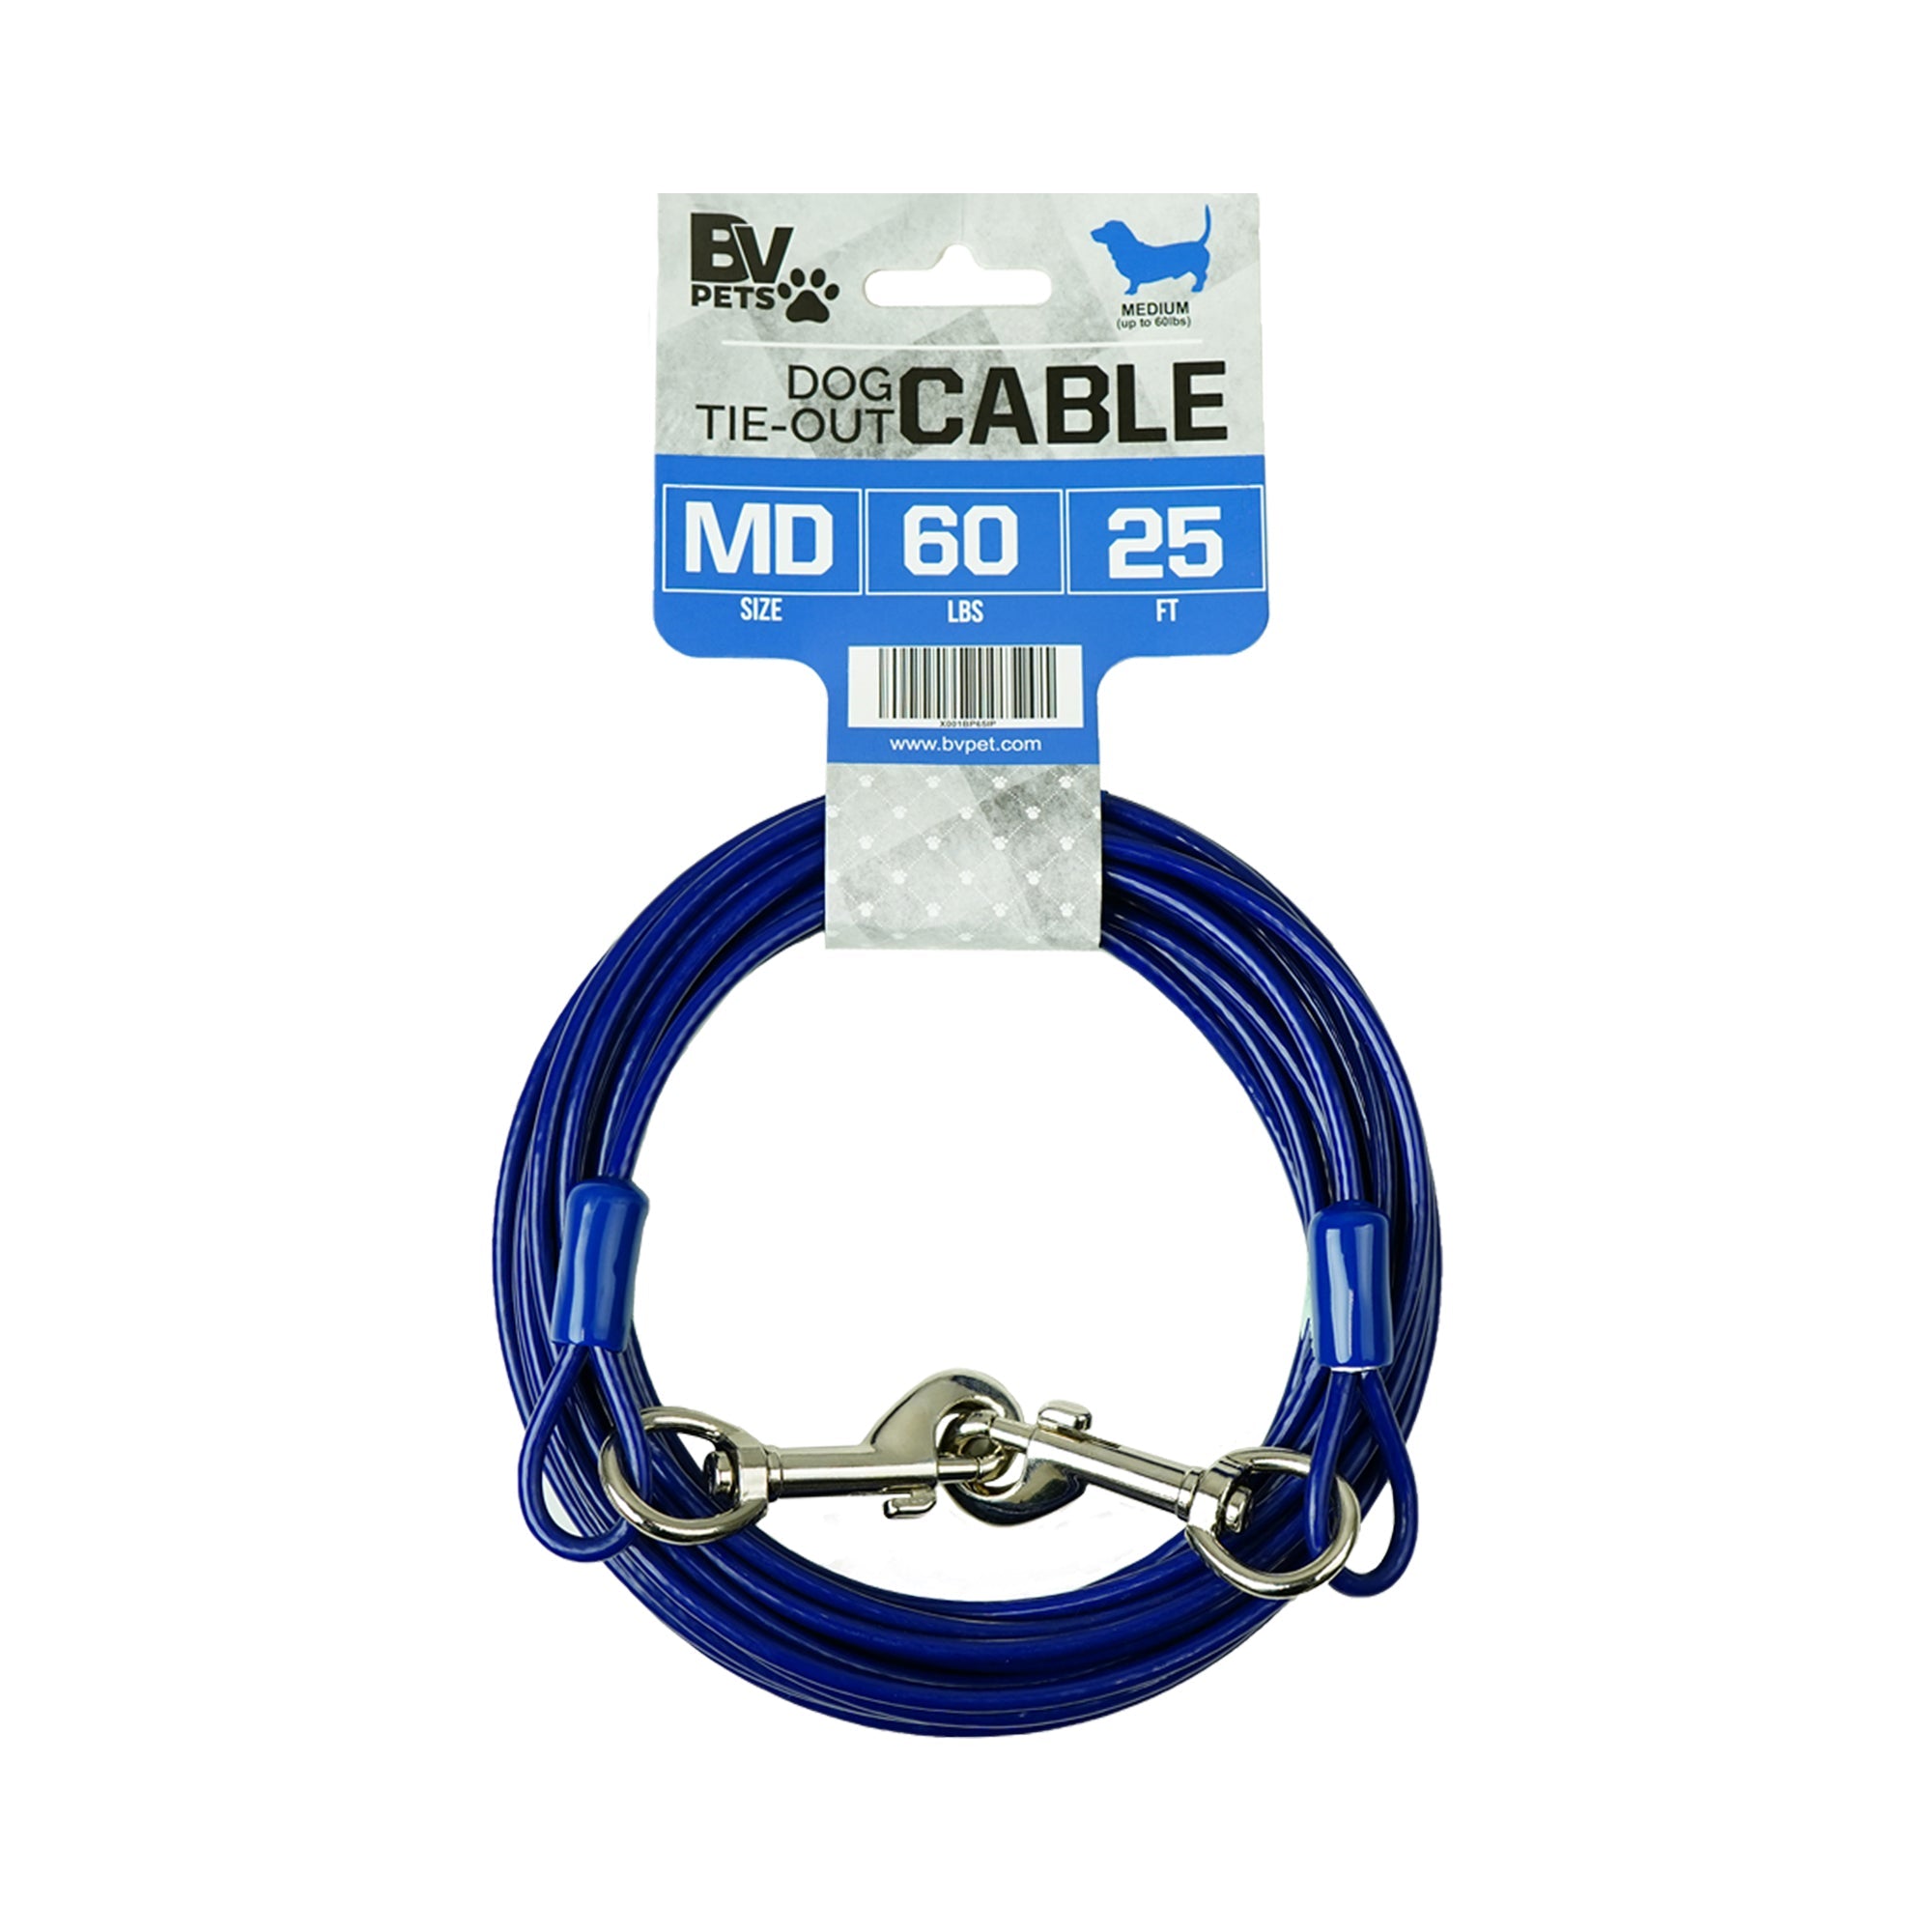 BV Pet Medium Tie Out Cable - for Dogs up to 60Lbs - 25ft